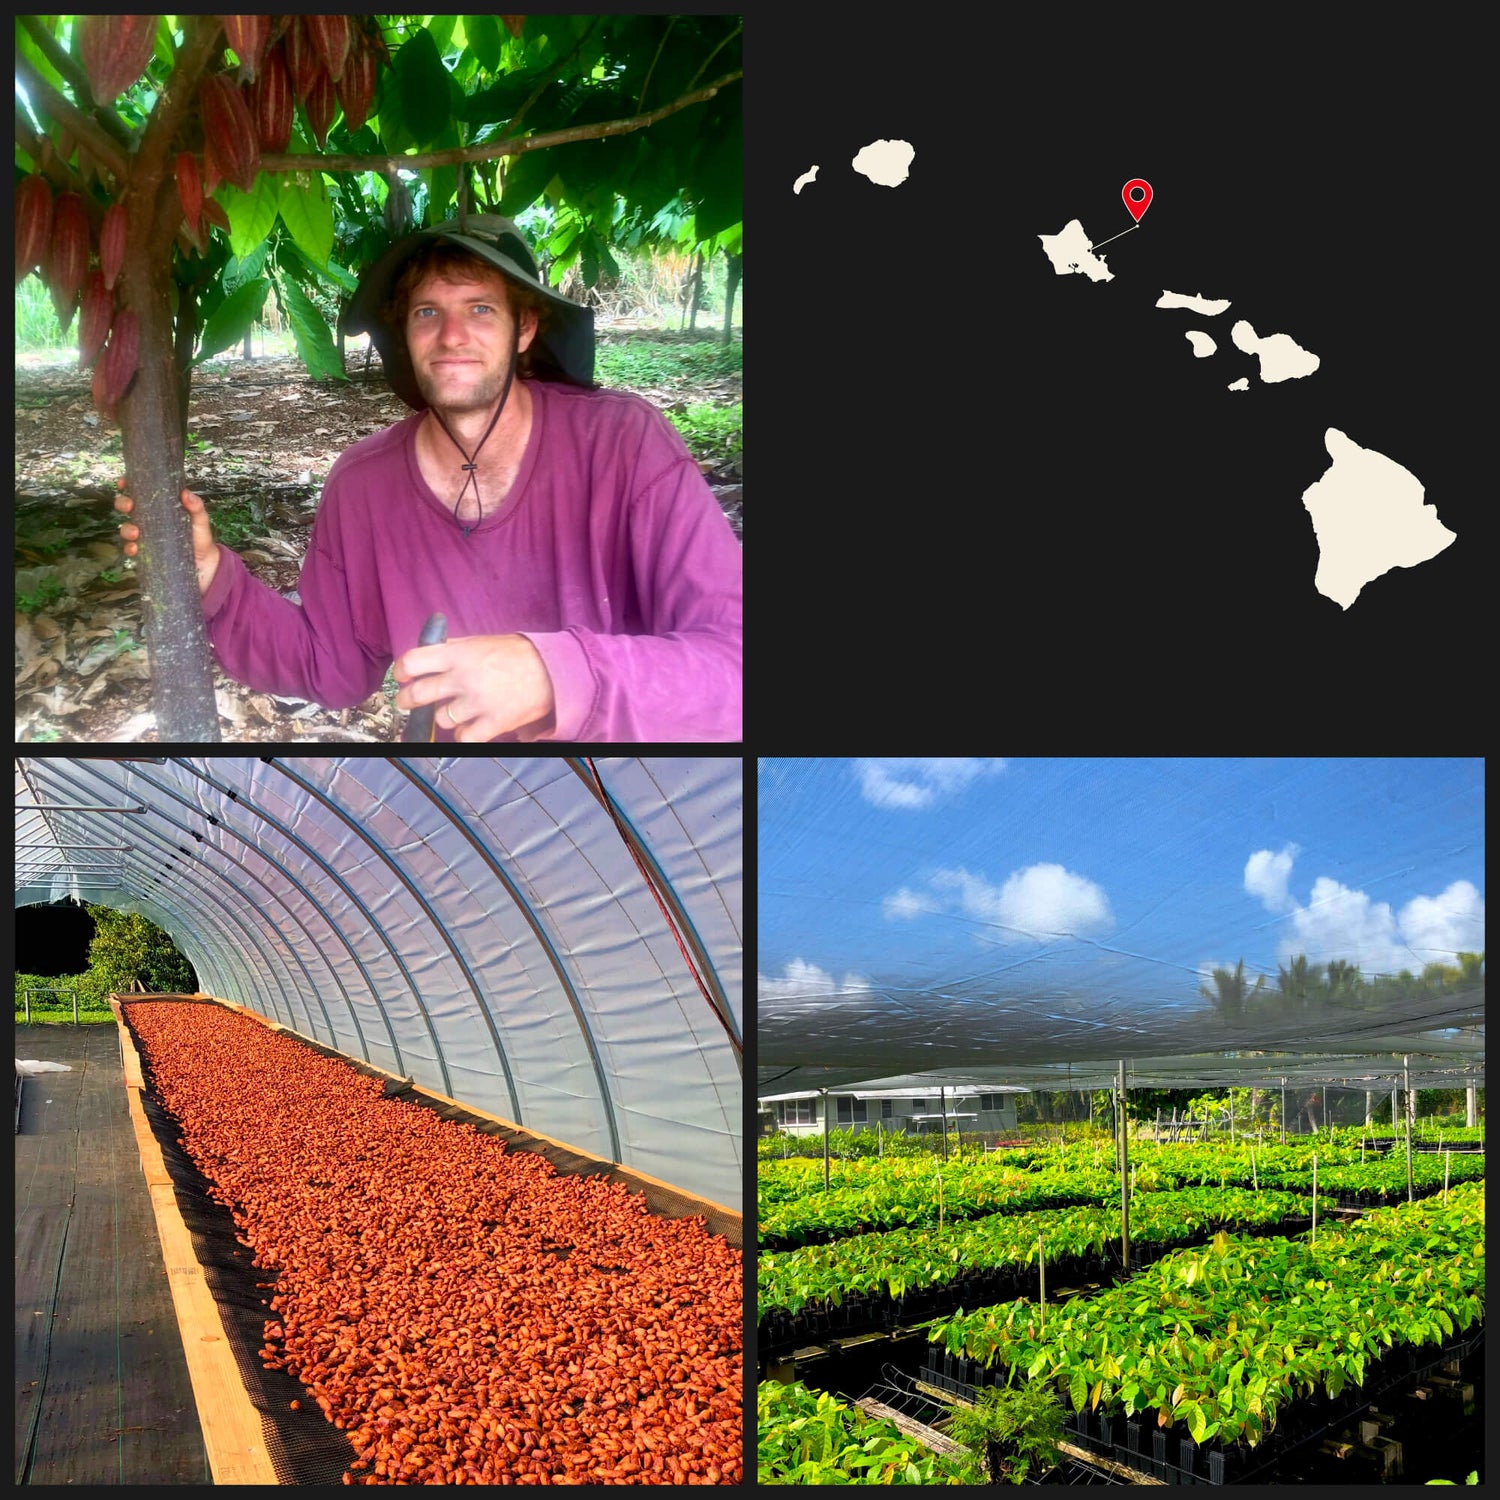 Image of man with cacao tree, drying cacao seeds, cacao tree seedlings, and map of the Hawaiian islands